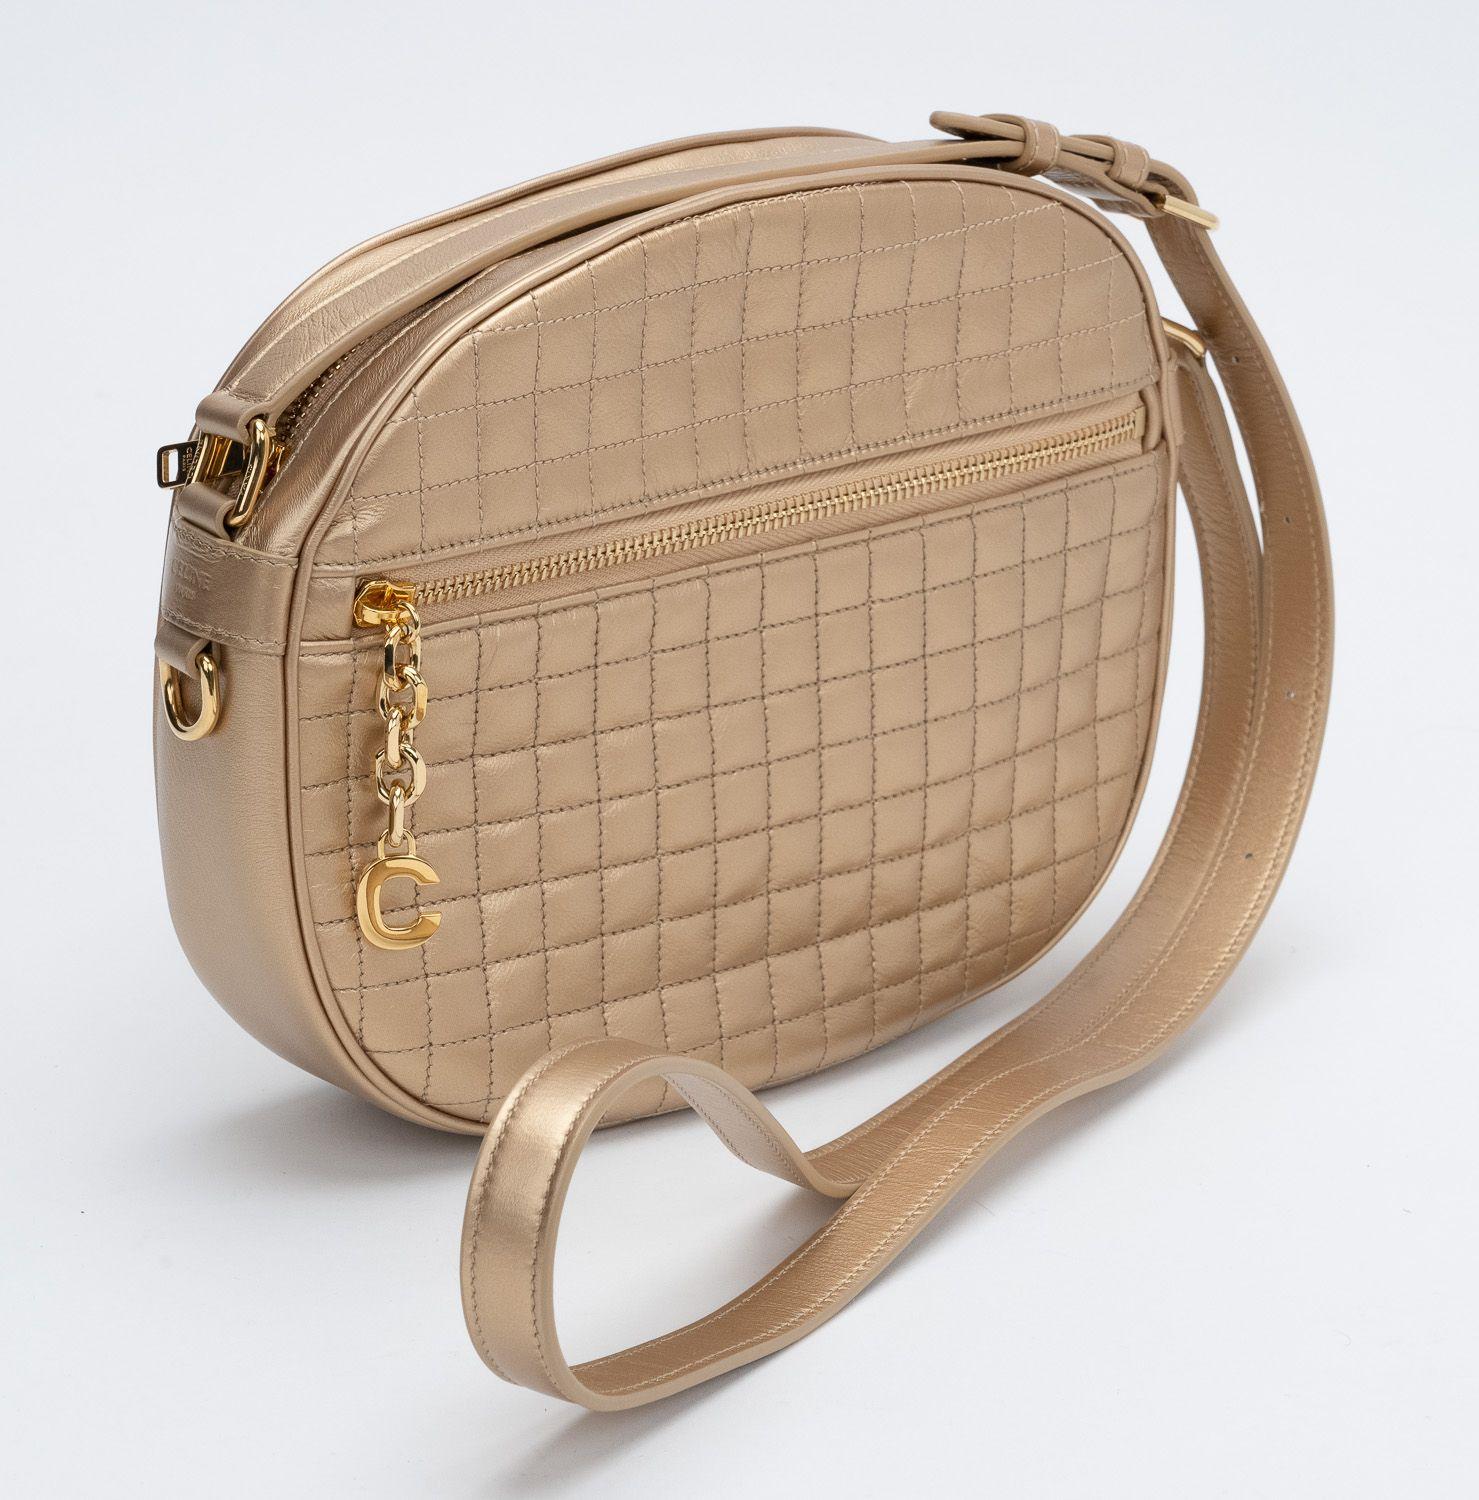 Celine Brand New Laminated Gold Quilted Calfskin Cross body Bag with gold metal C charm. Adjustable shoulder shoulder strap and a front zipper pocket. Beige fabric interior lining. Comes with booklet and original dust cover.